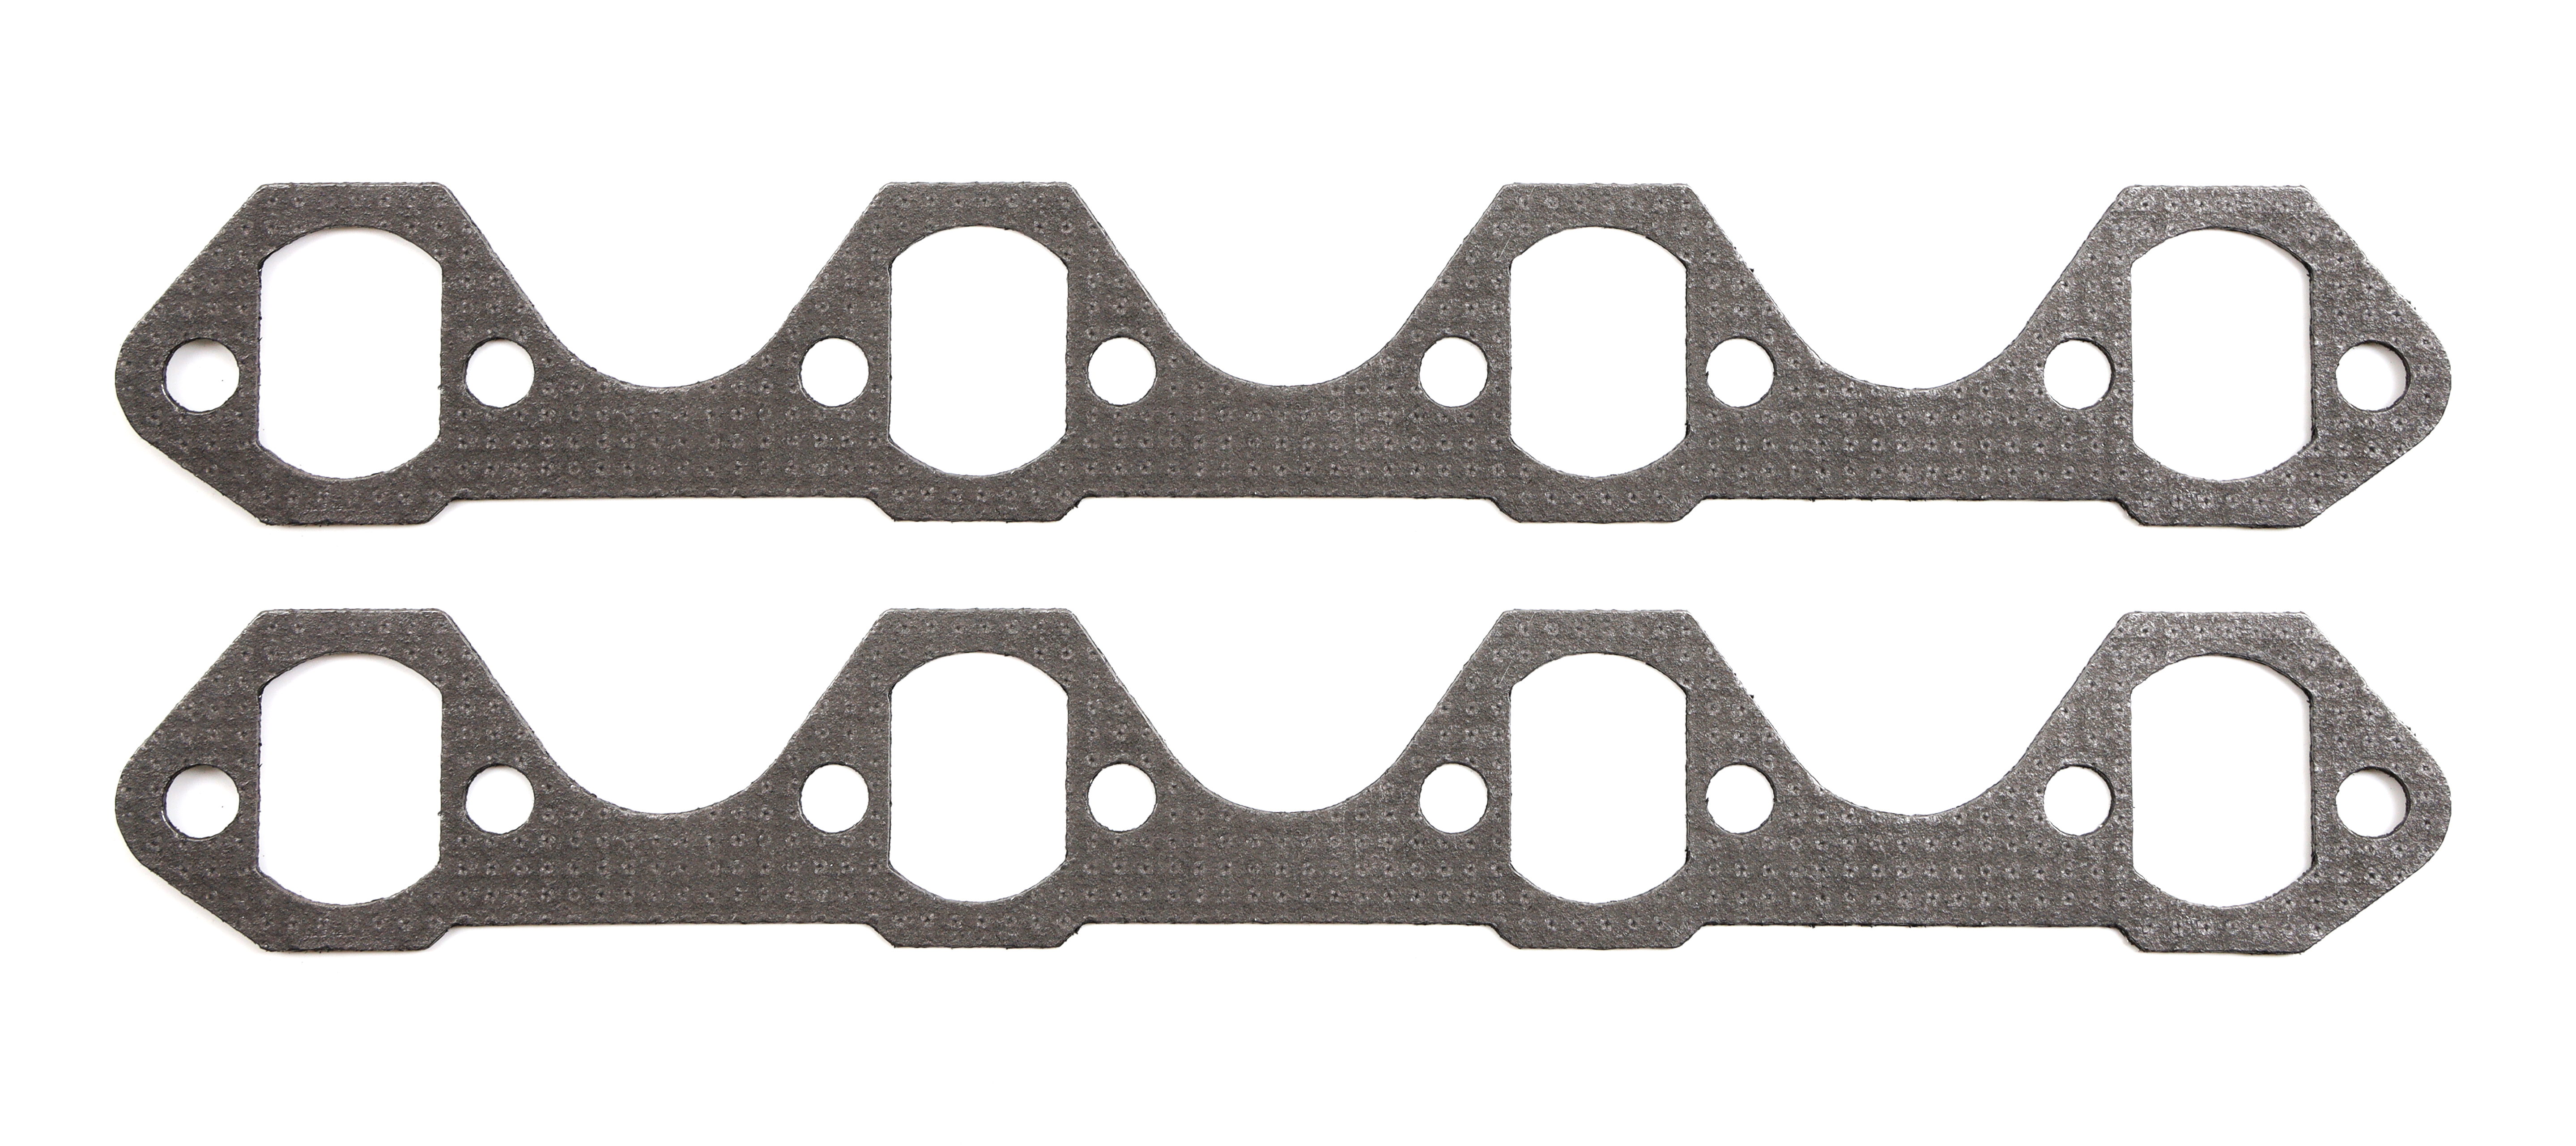 Cometic Gaskets C15572HT - Exhaust Manifold / Header Gasket, 1.751 x 1.231 in Oval Port, Steel Core Laminate, Small Block Ford, Pair